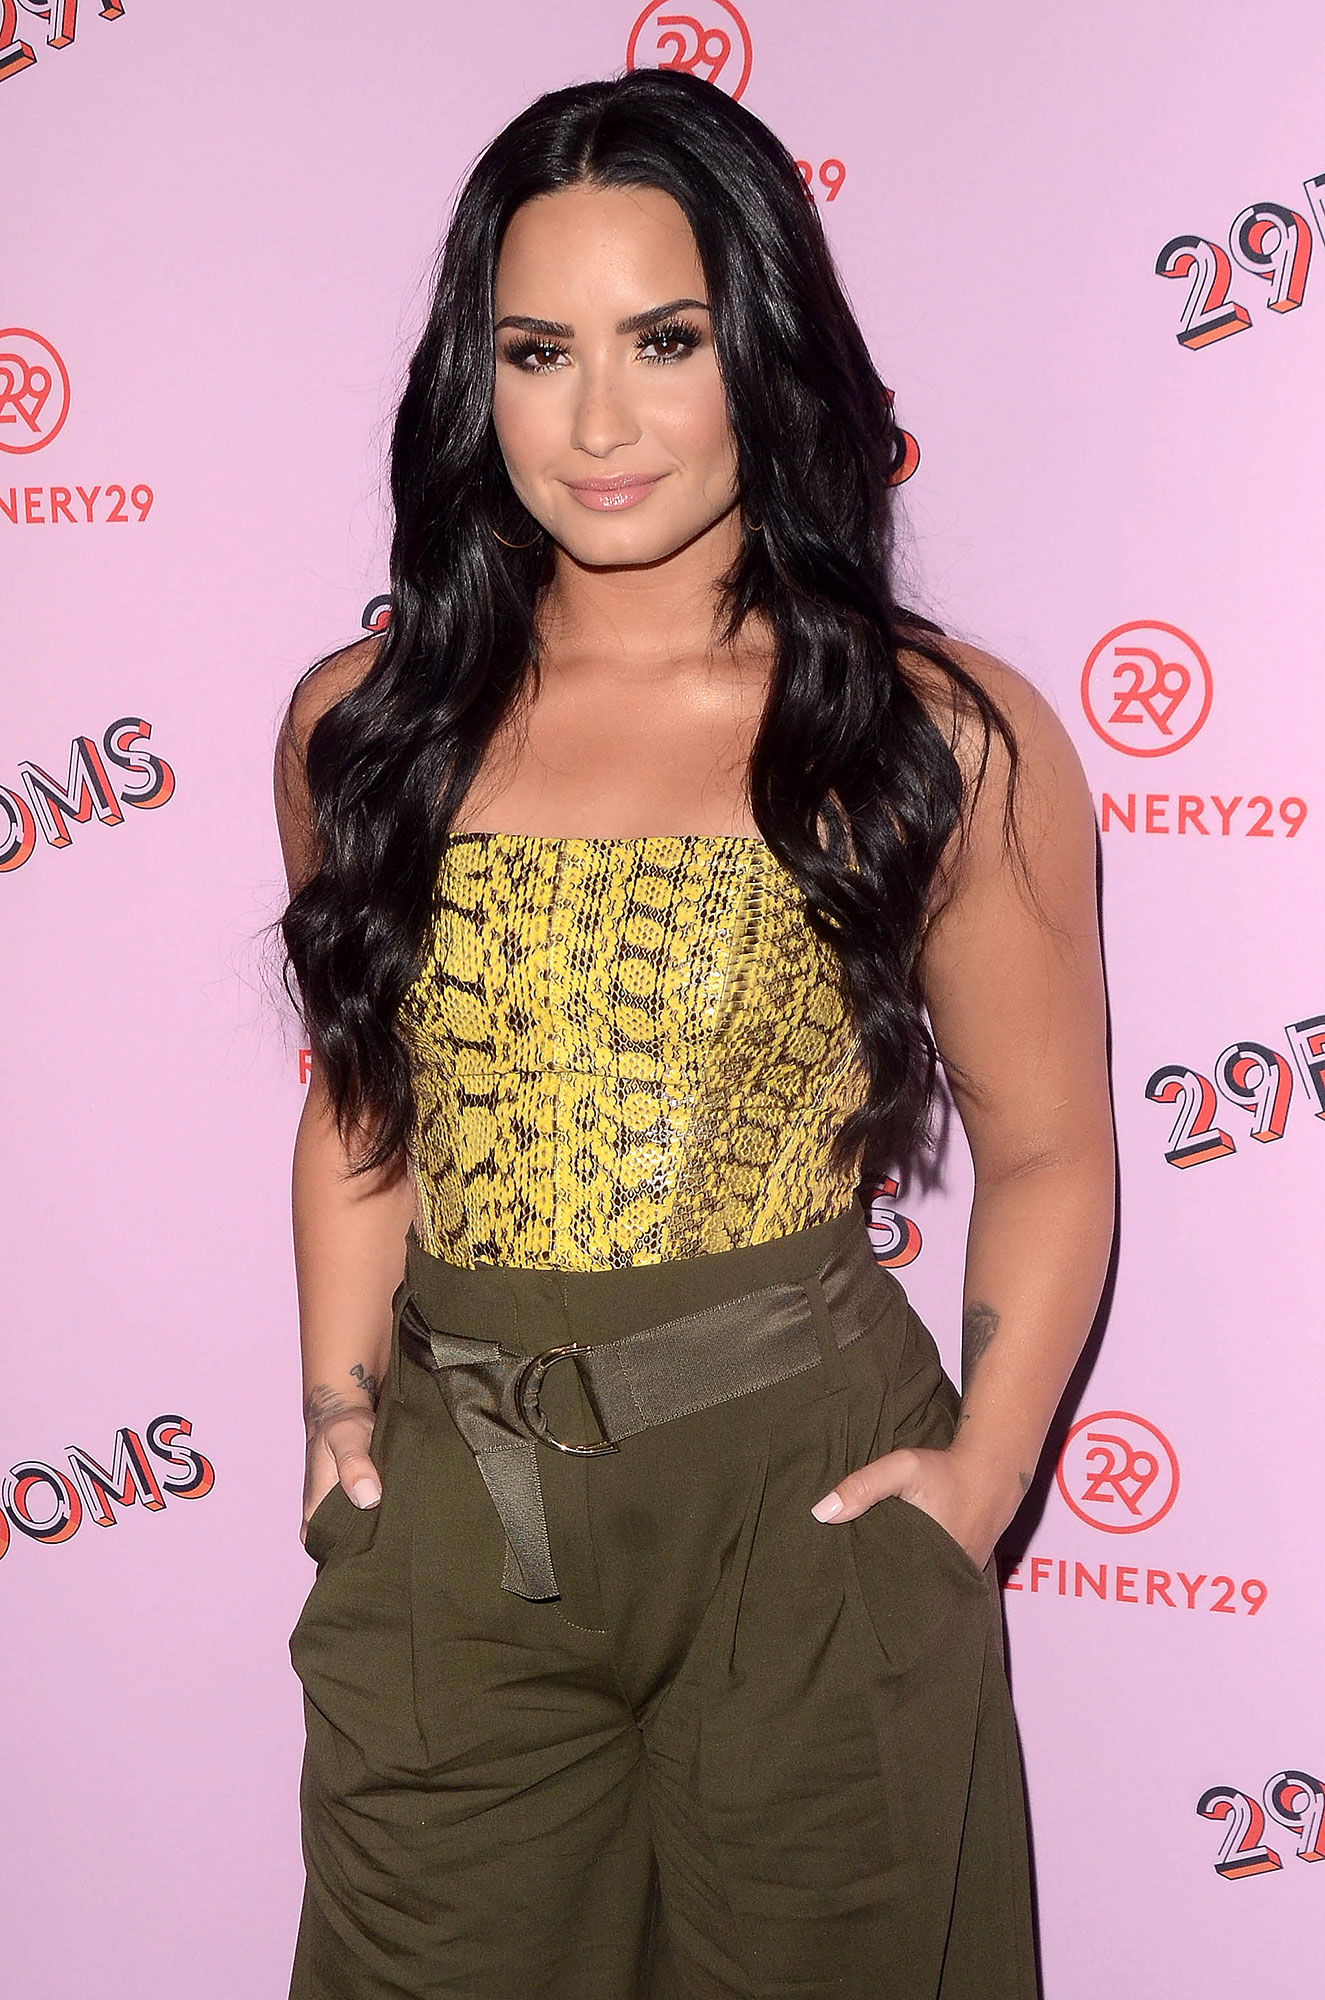 Demi Lovato 'Call Her Daddy' Revelations: '29' Meaning and More